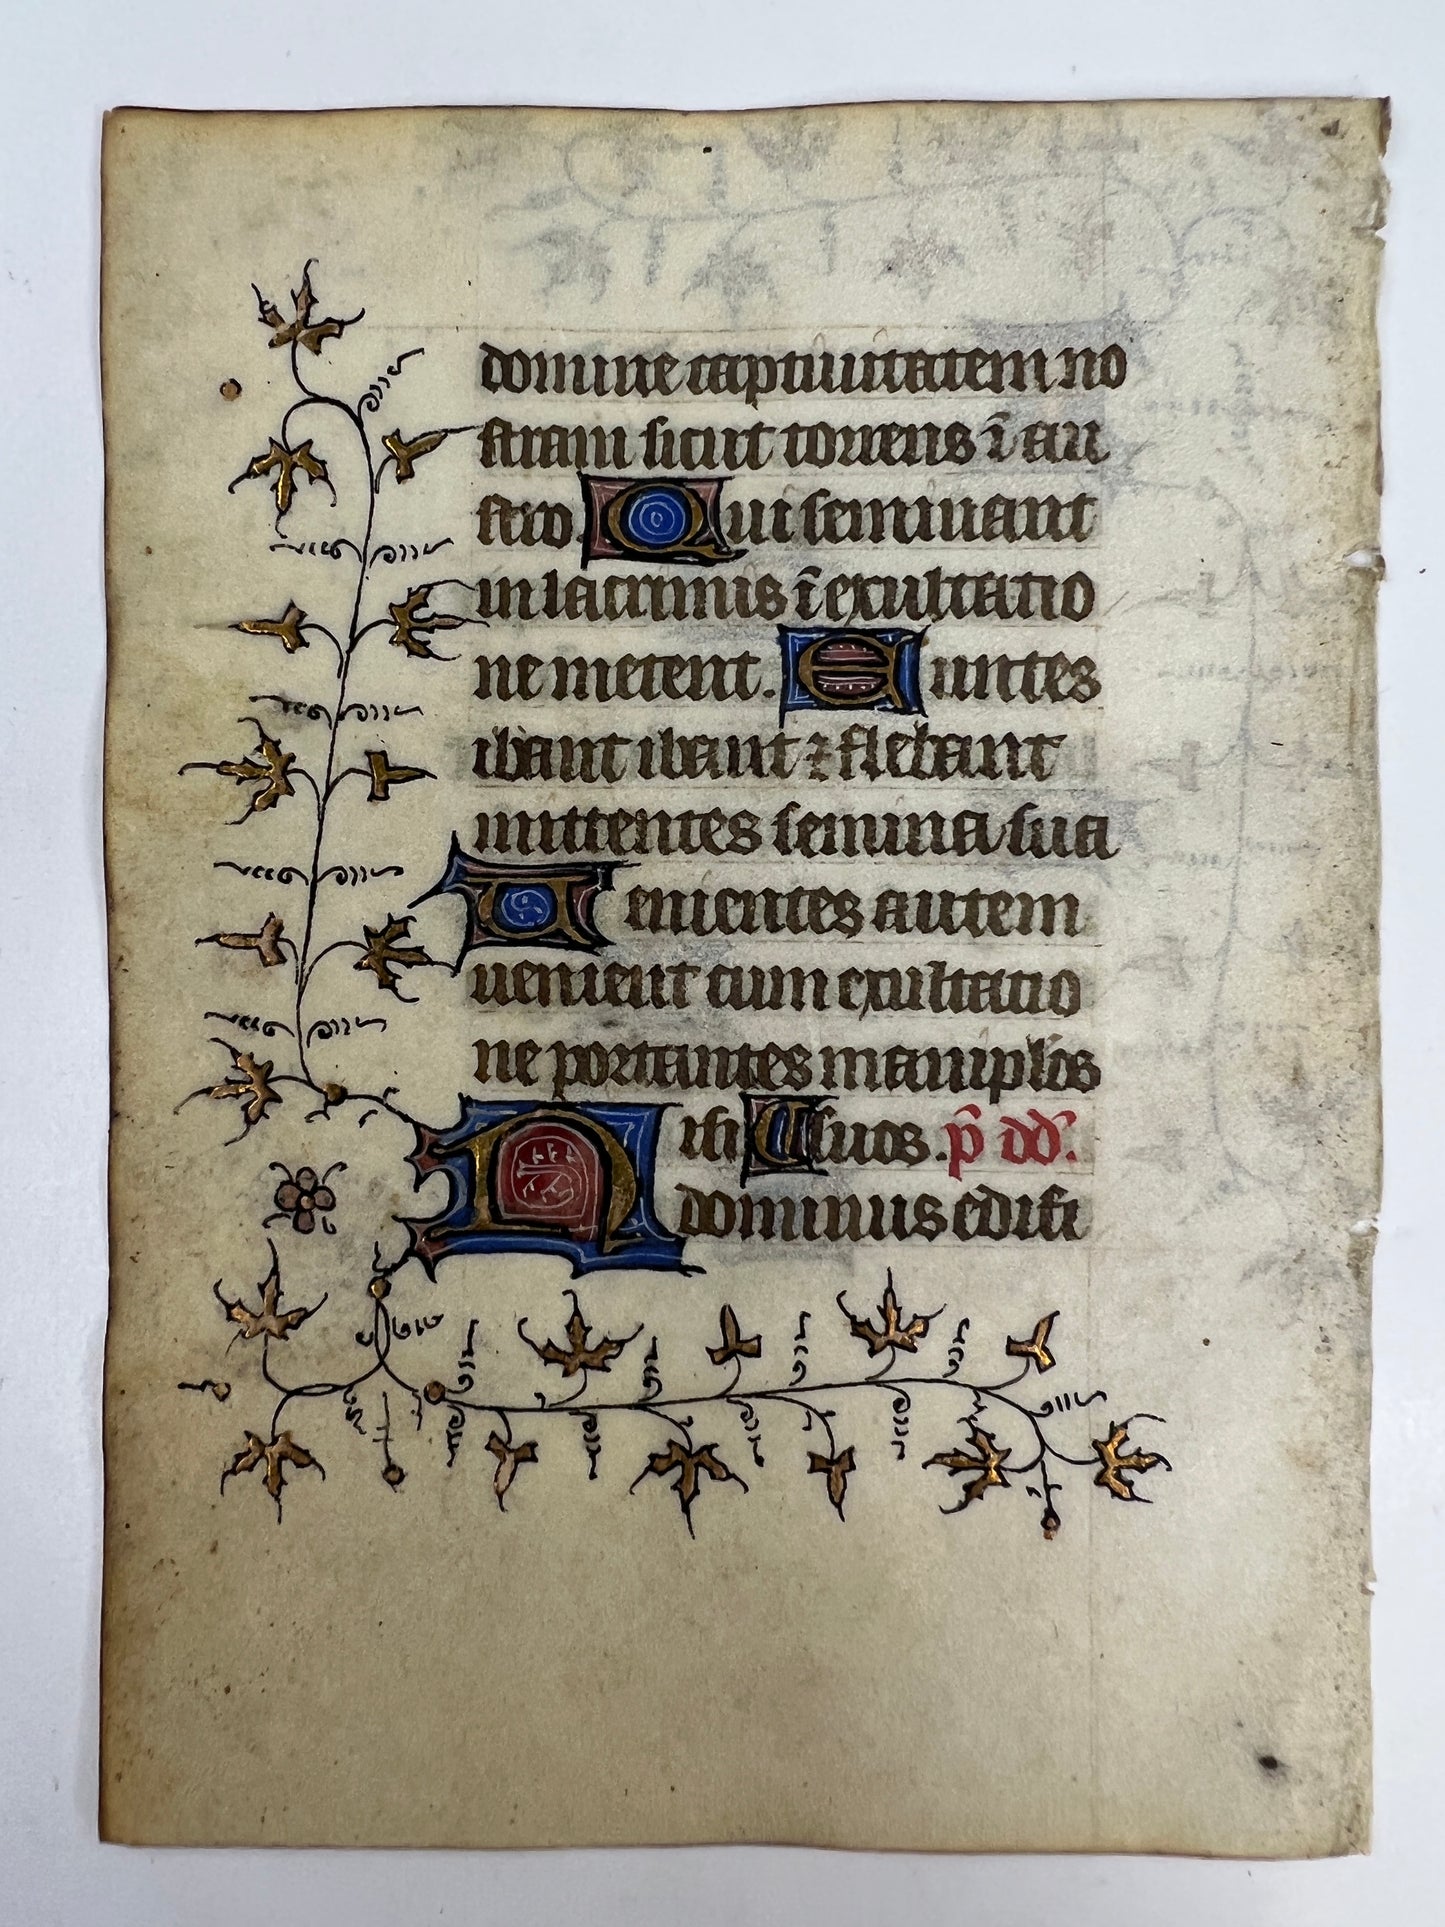 c1430 Illuminated Manuscript Vellum Leaf from a Book of Hours Use of Tours/Rouen